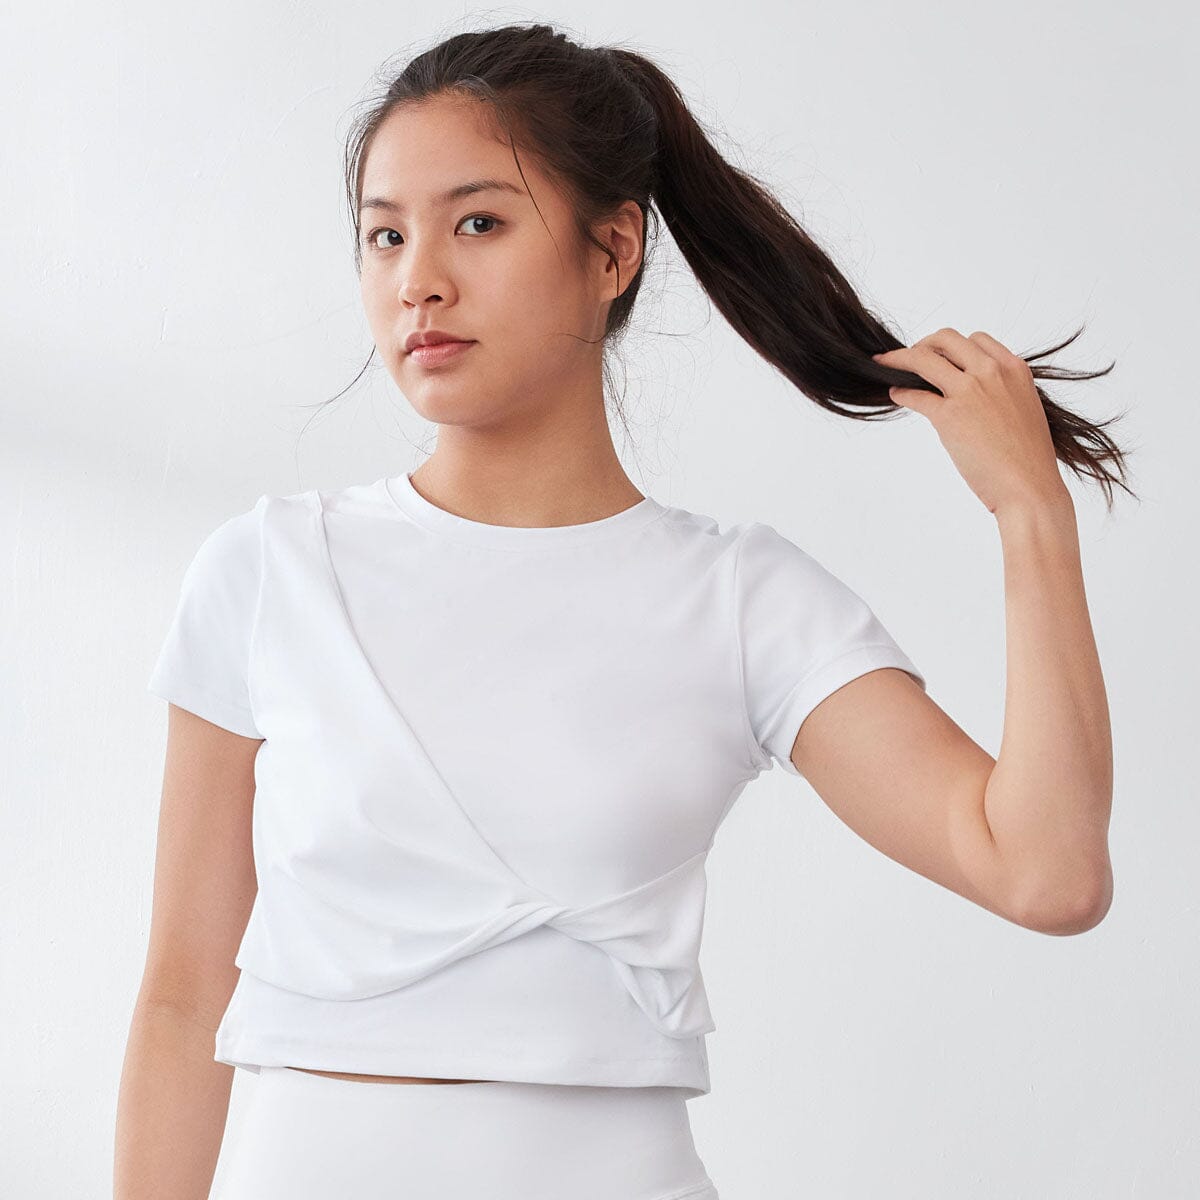 Effortless Sustainable UV Protection Yoga Wrap Short Sleeve Crop Top Tops Her own words SPORTS Bright White XS 